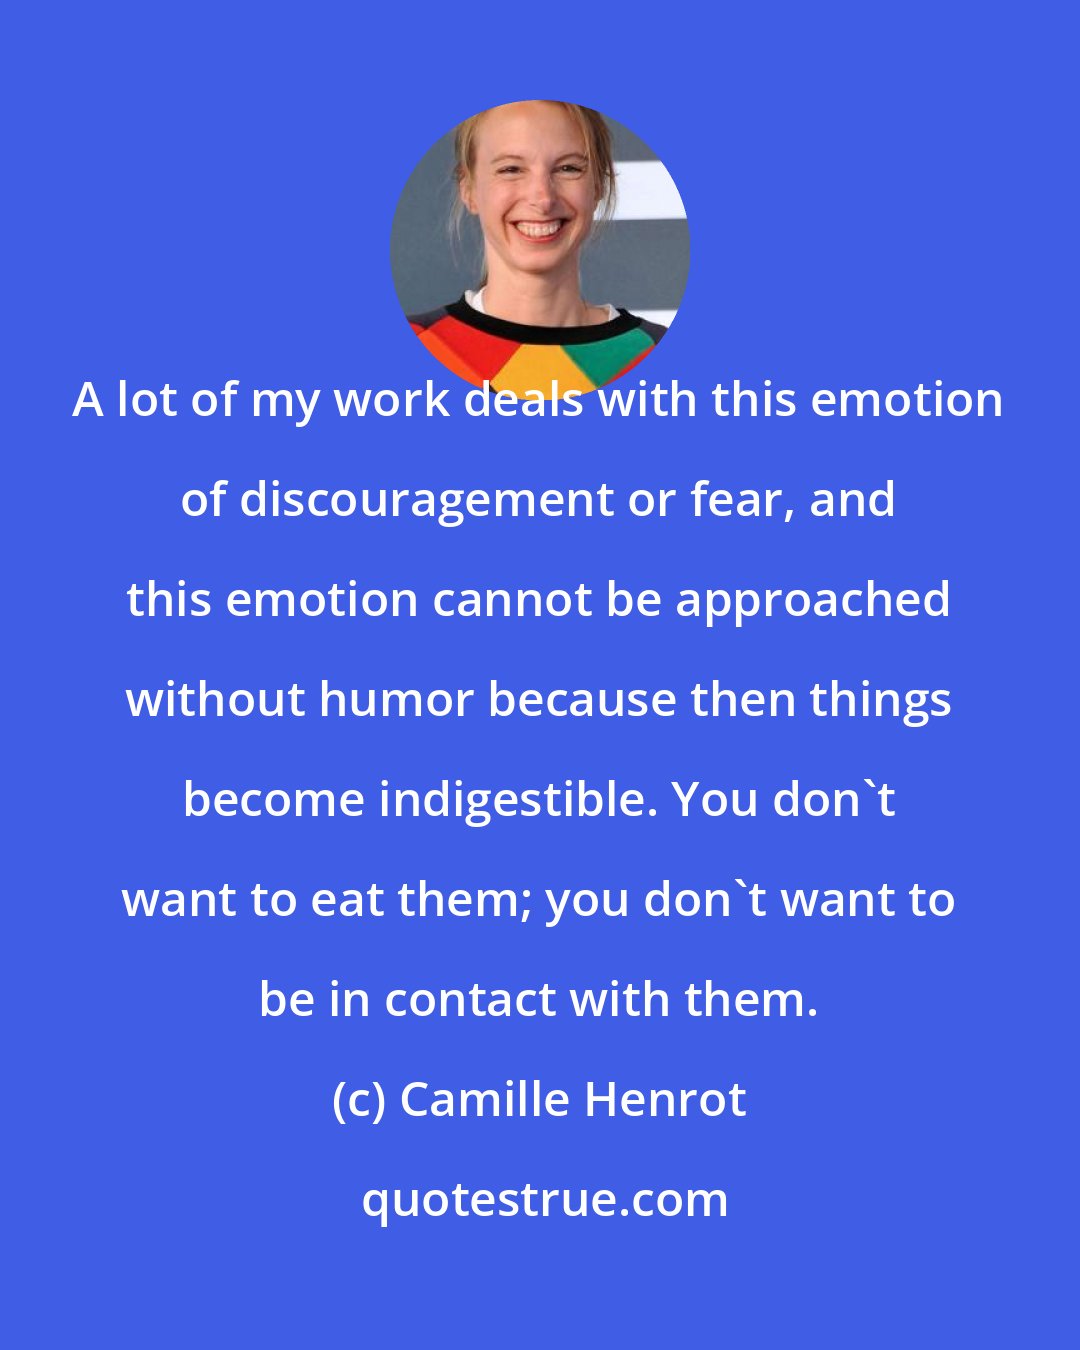 Camille Henrot: A lot of my work deals with this emotion of discouragement or fear, and this emotion cannot be approached without humor because then things become indigestible. You don't want to eat them; you don't want to be in contact with them.